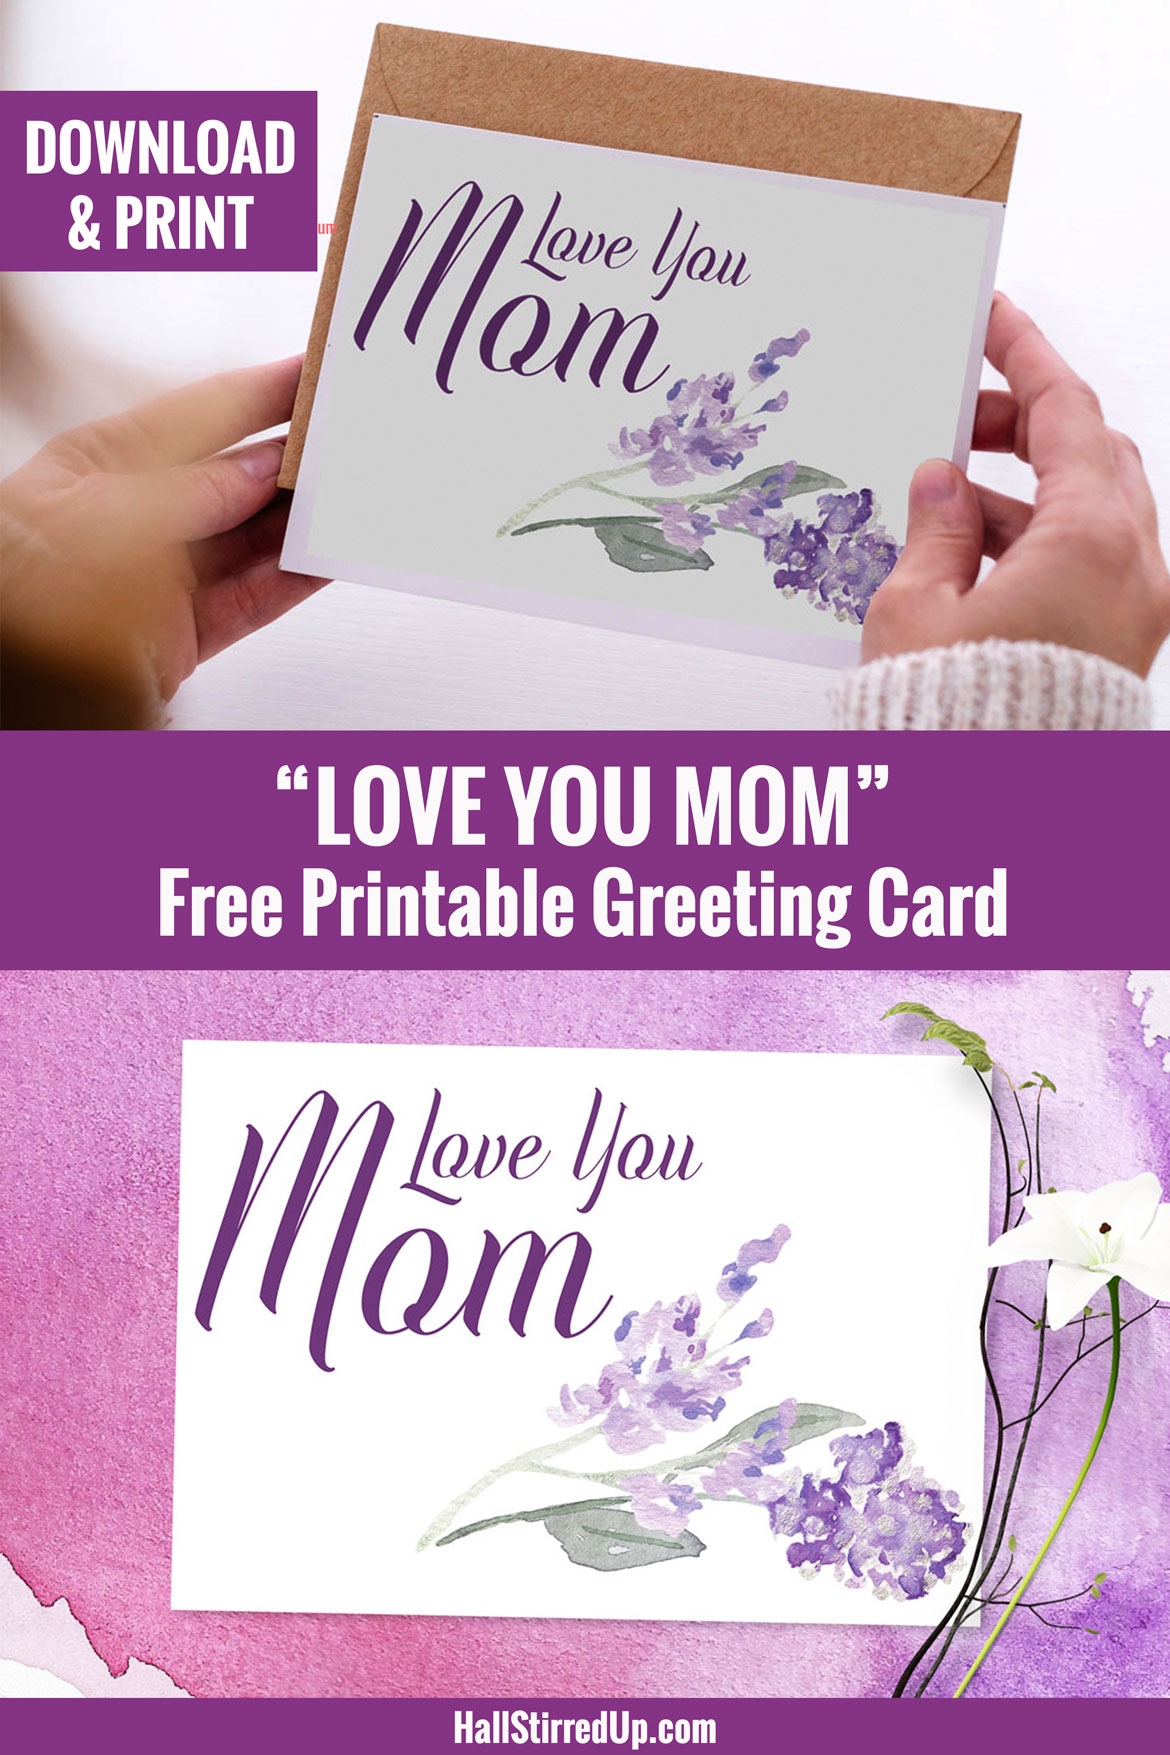 Happy Mother's Day and a free printable card for Mom